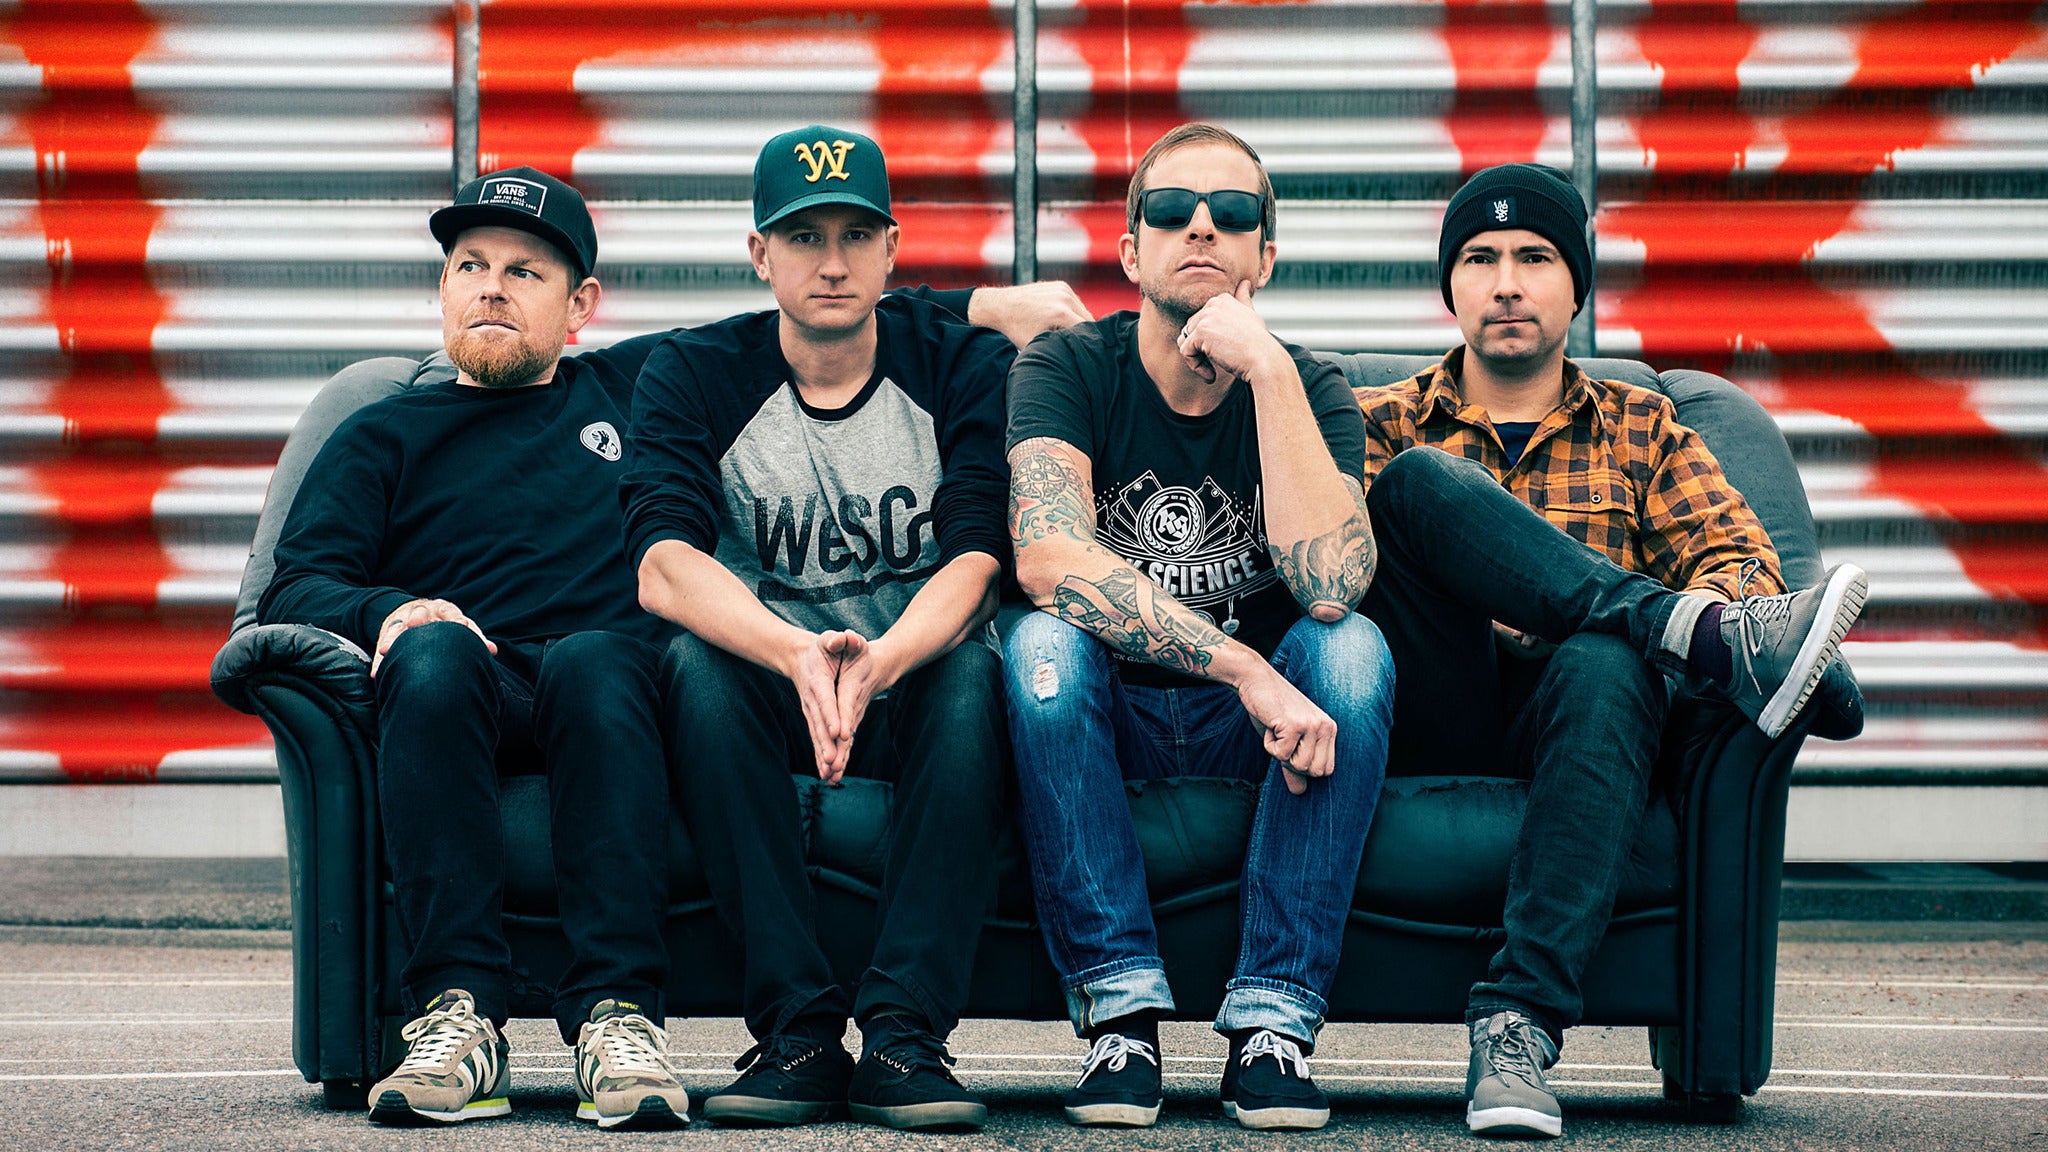 Image used with permission from Ticketmaster | Millencolin tickets